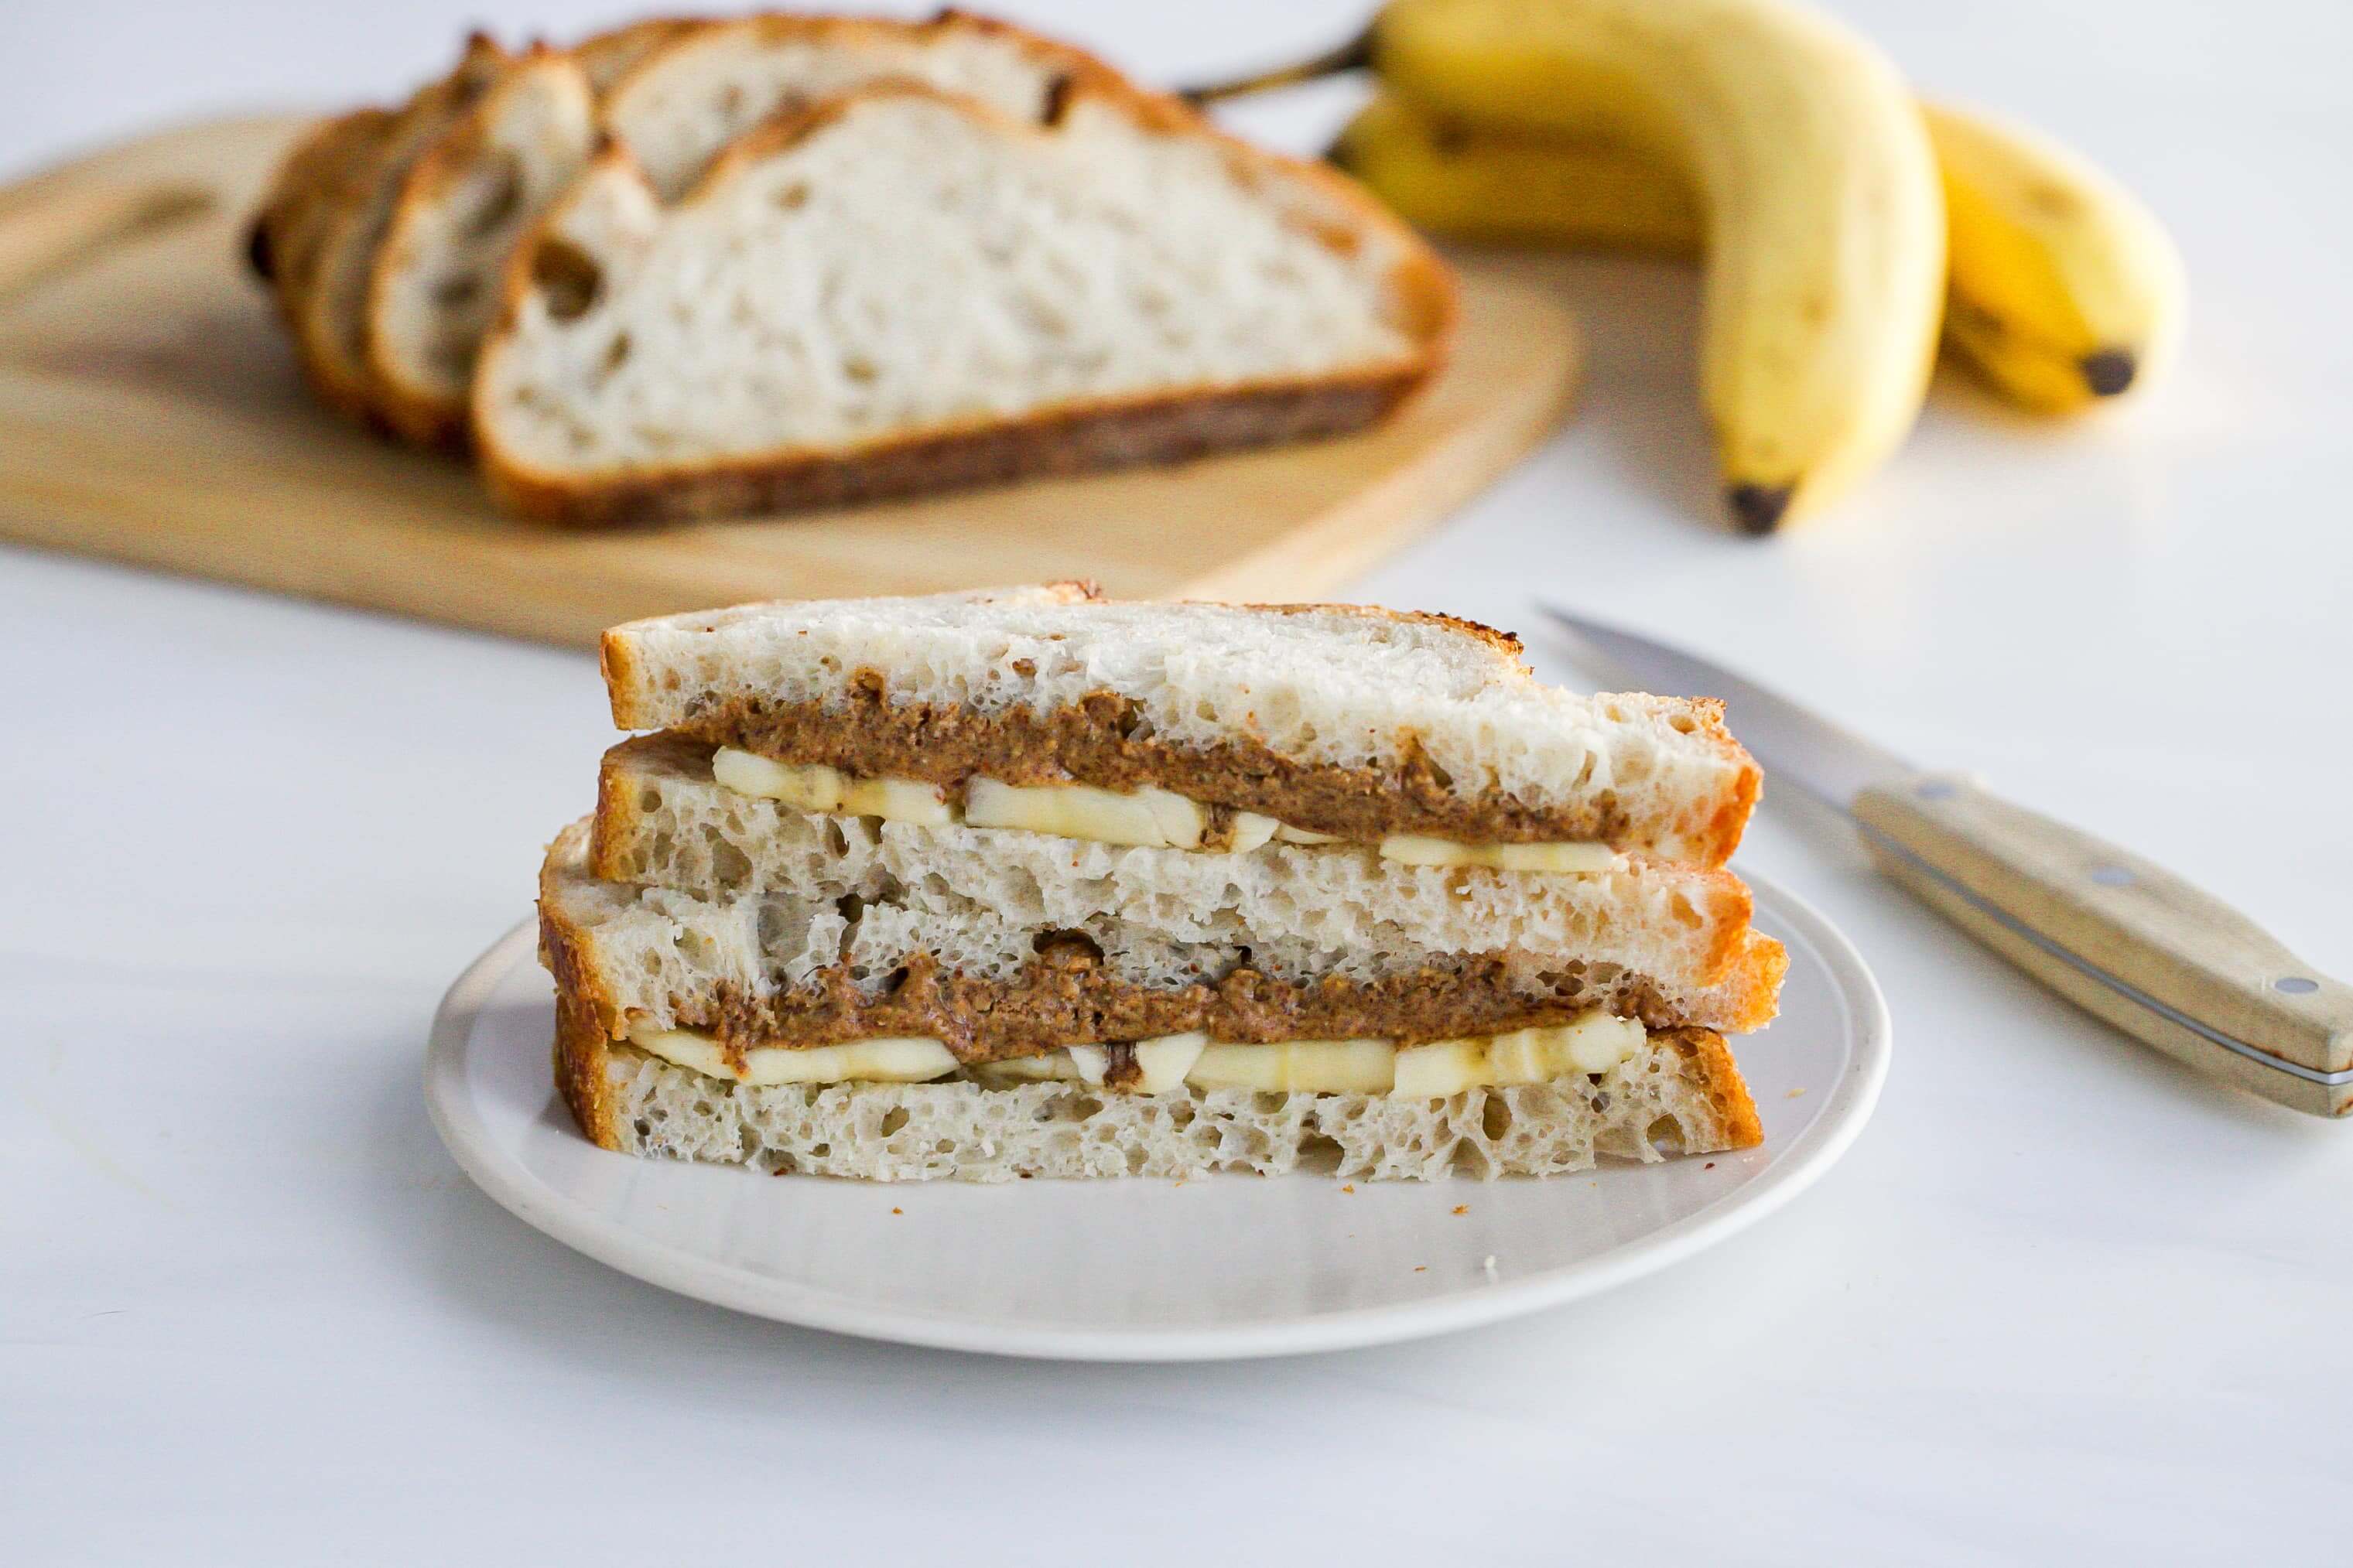 5 Ingredient Meal Ideas Your Clients Will Love: Almond Butter & Banana Sandwich